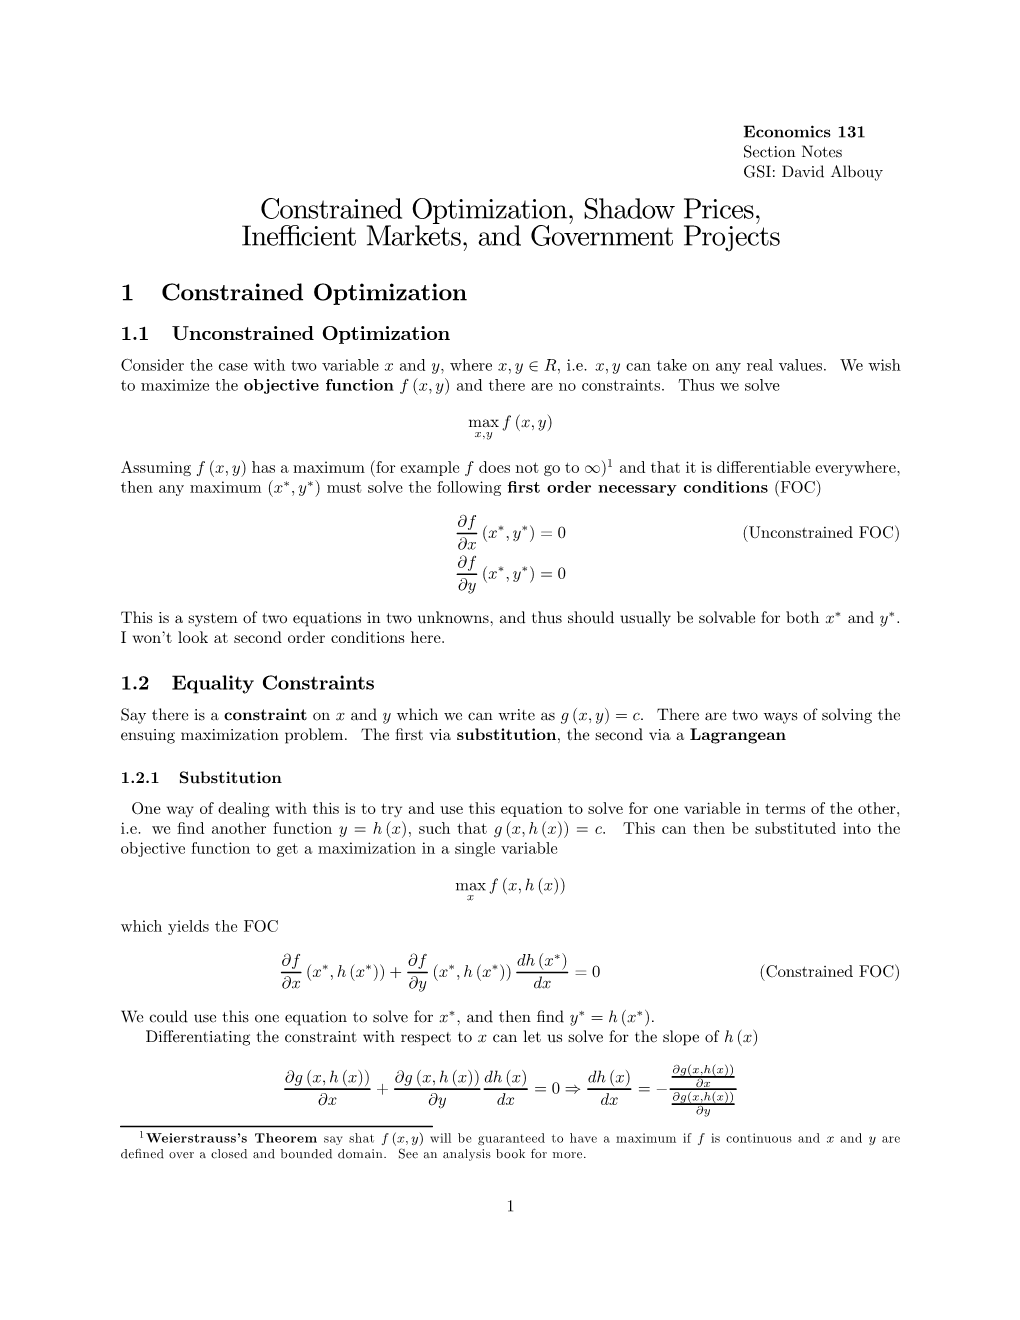 Constrained Optimization, Shadow Prices, Inefficient Markets, And